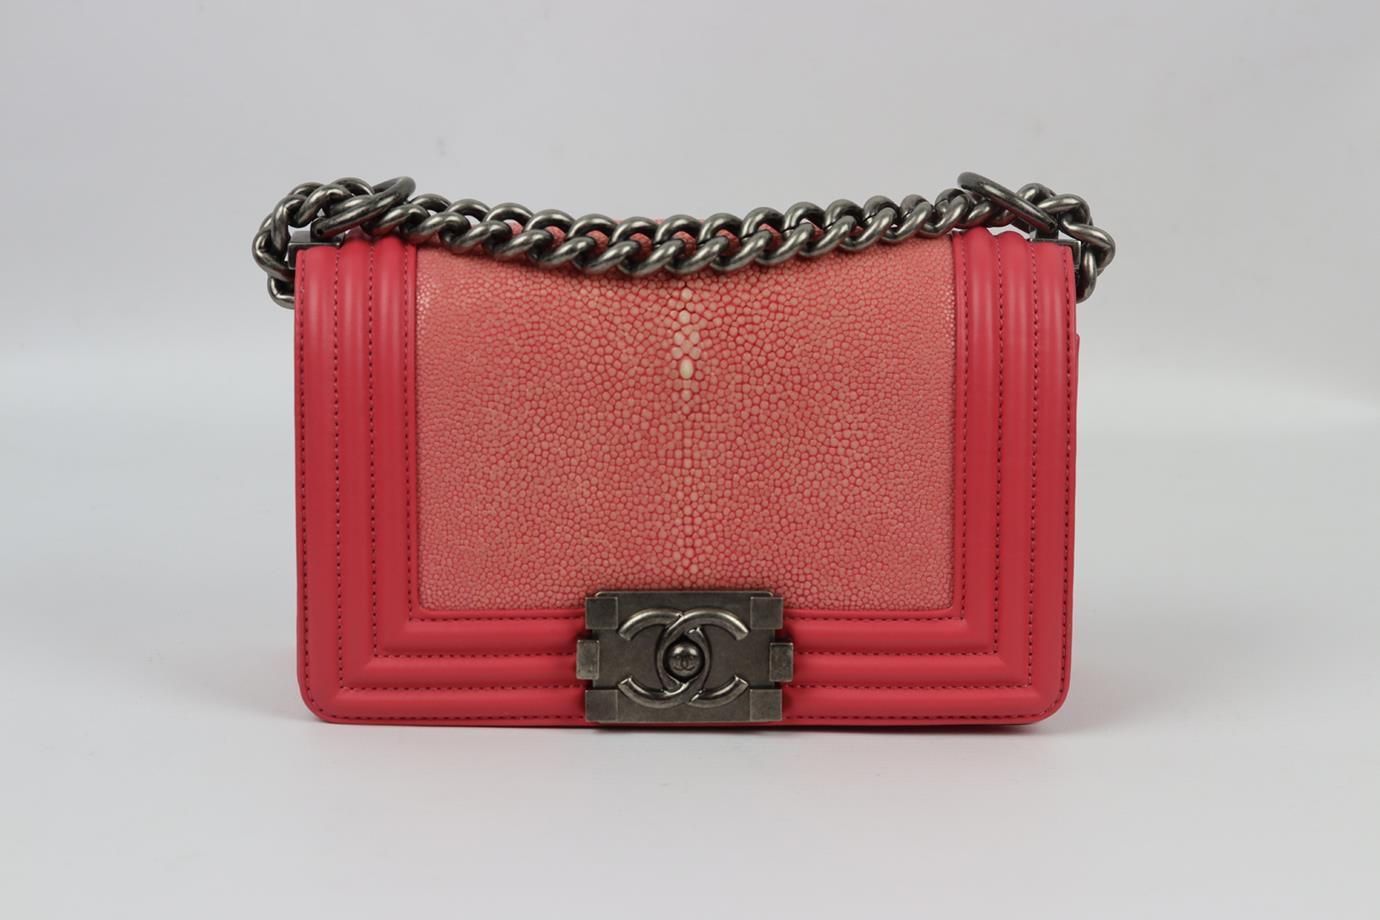 Chanel 2016 Boy small shagreen and leather shoulder bag. Made from coral-pink shagreen and leather with matching leather interior and ruthenium chain shoulder straps. Coral-pink. Push lock fastening at front. Does not come with authenticity card.